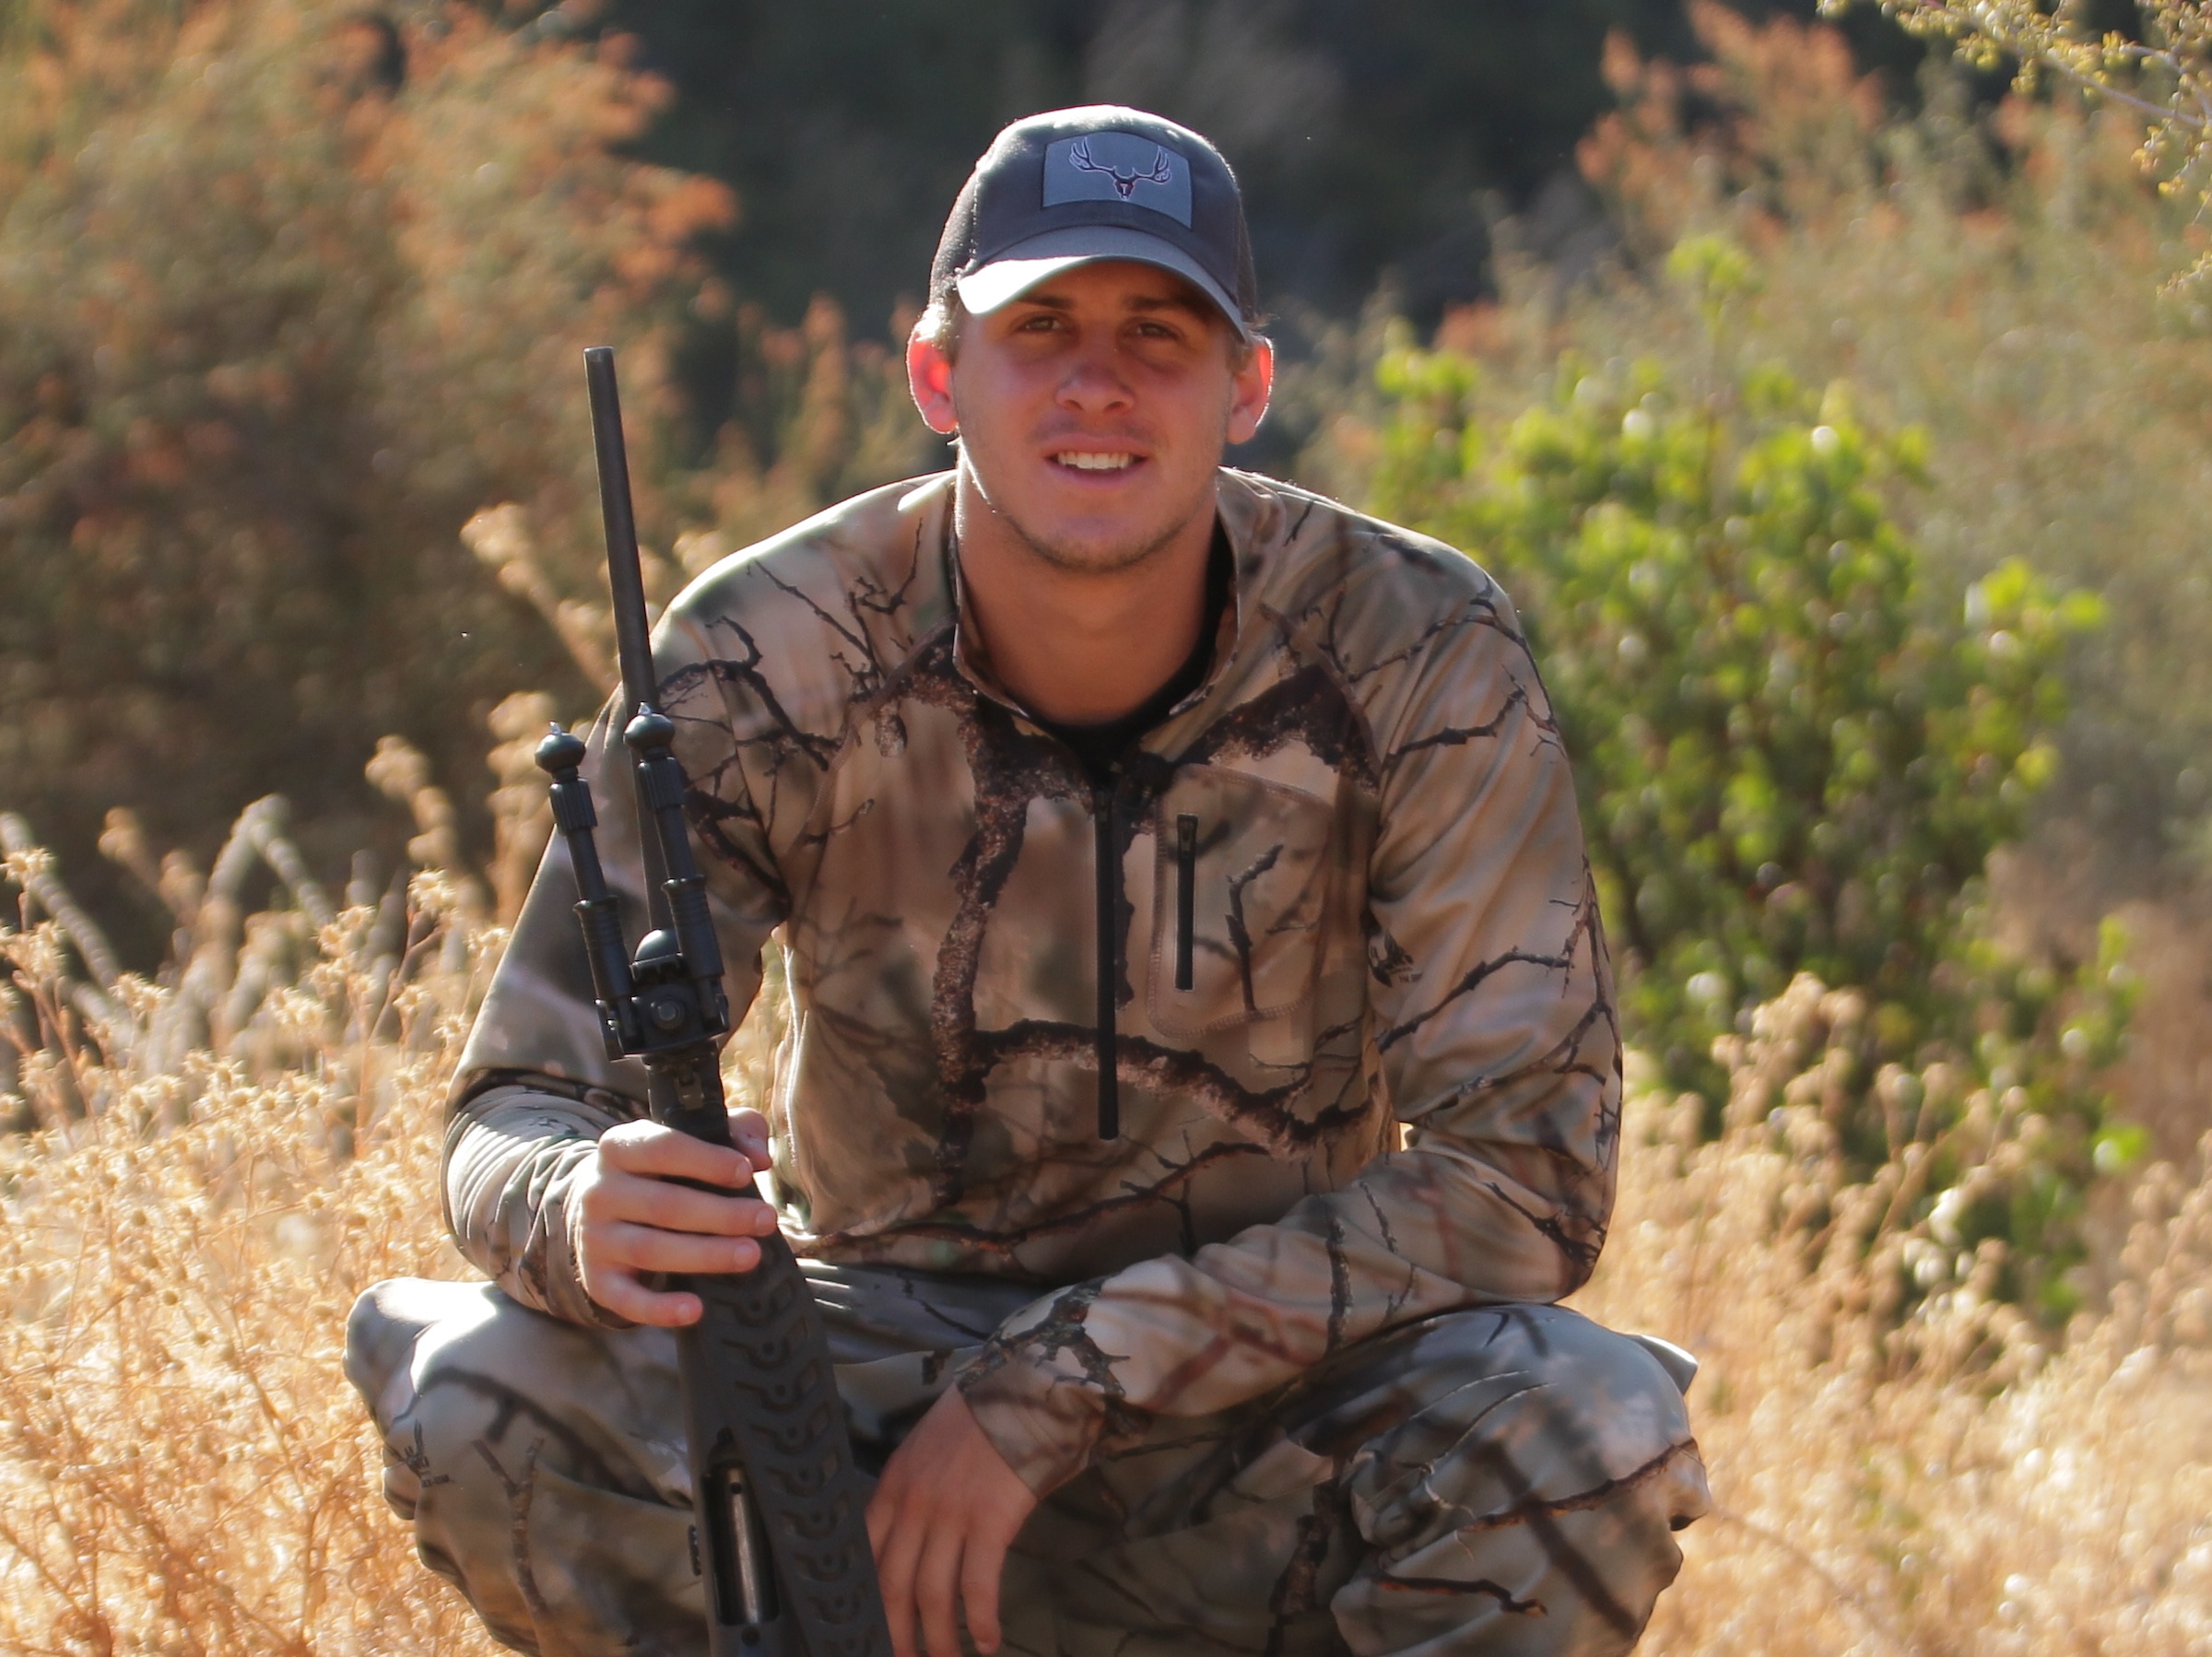 Top NFL Prospect Jared Goff on a hog hunt this week on Gridiron Outdoors presented by GO Wild Camo on the Outdoor Channel